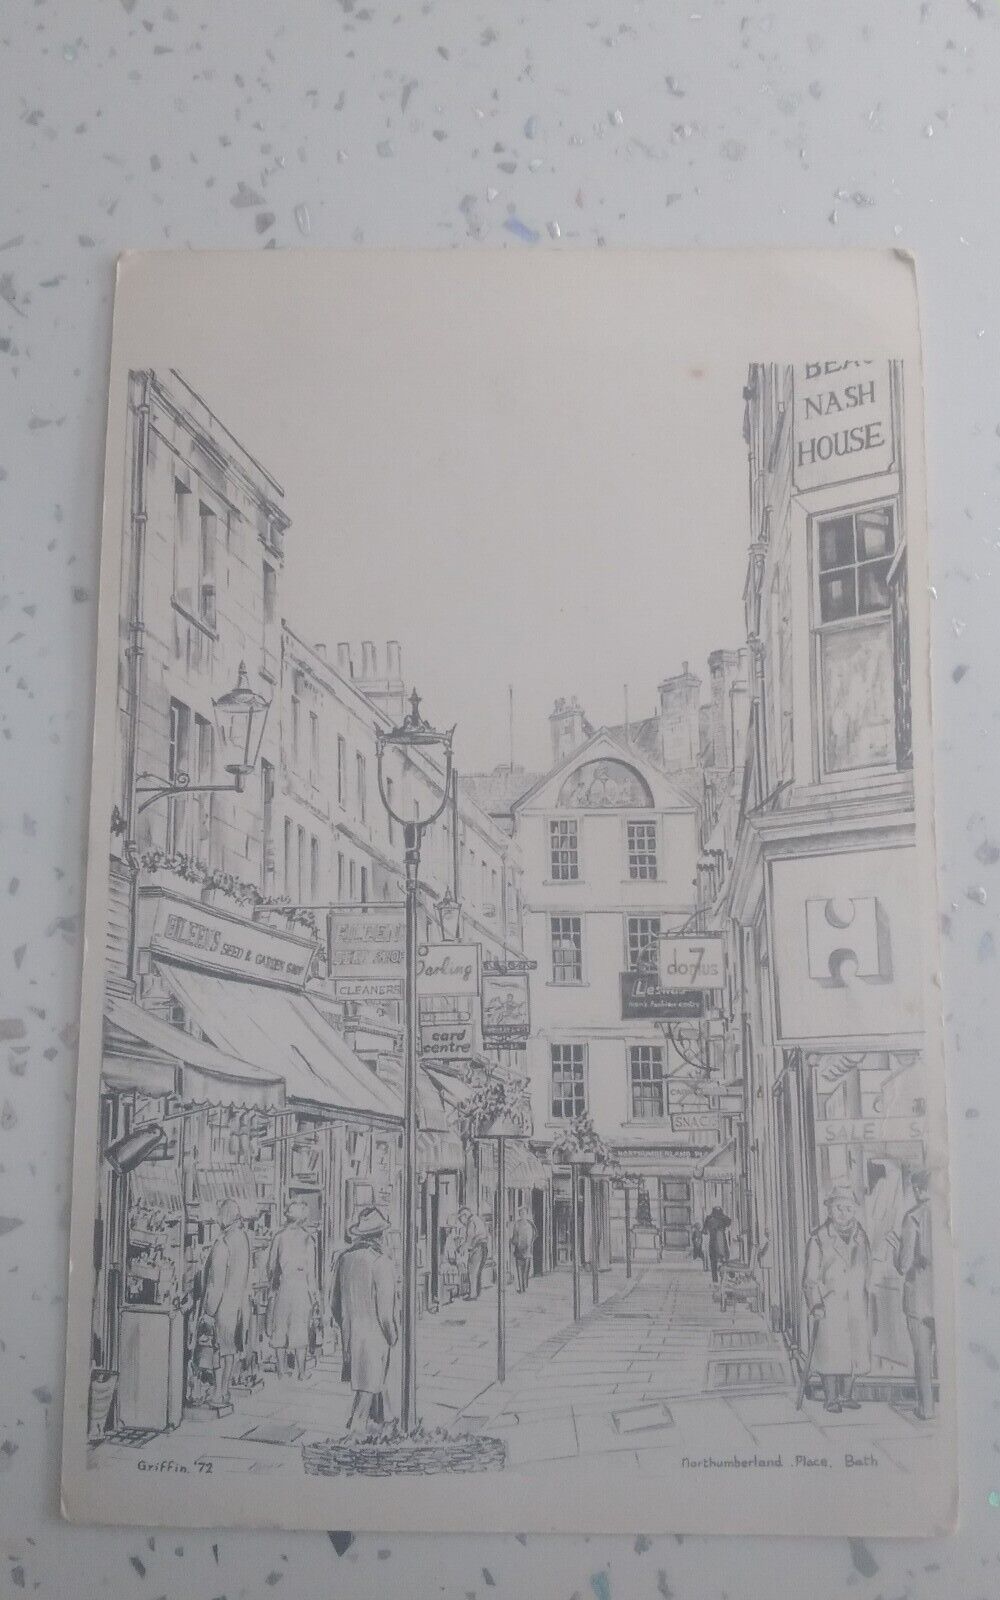 House Clearance - VINTAGE POSTCARD  "NORTHUMBERLAND PLACE,BATH" BY GRIFFIN 1972